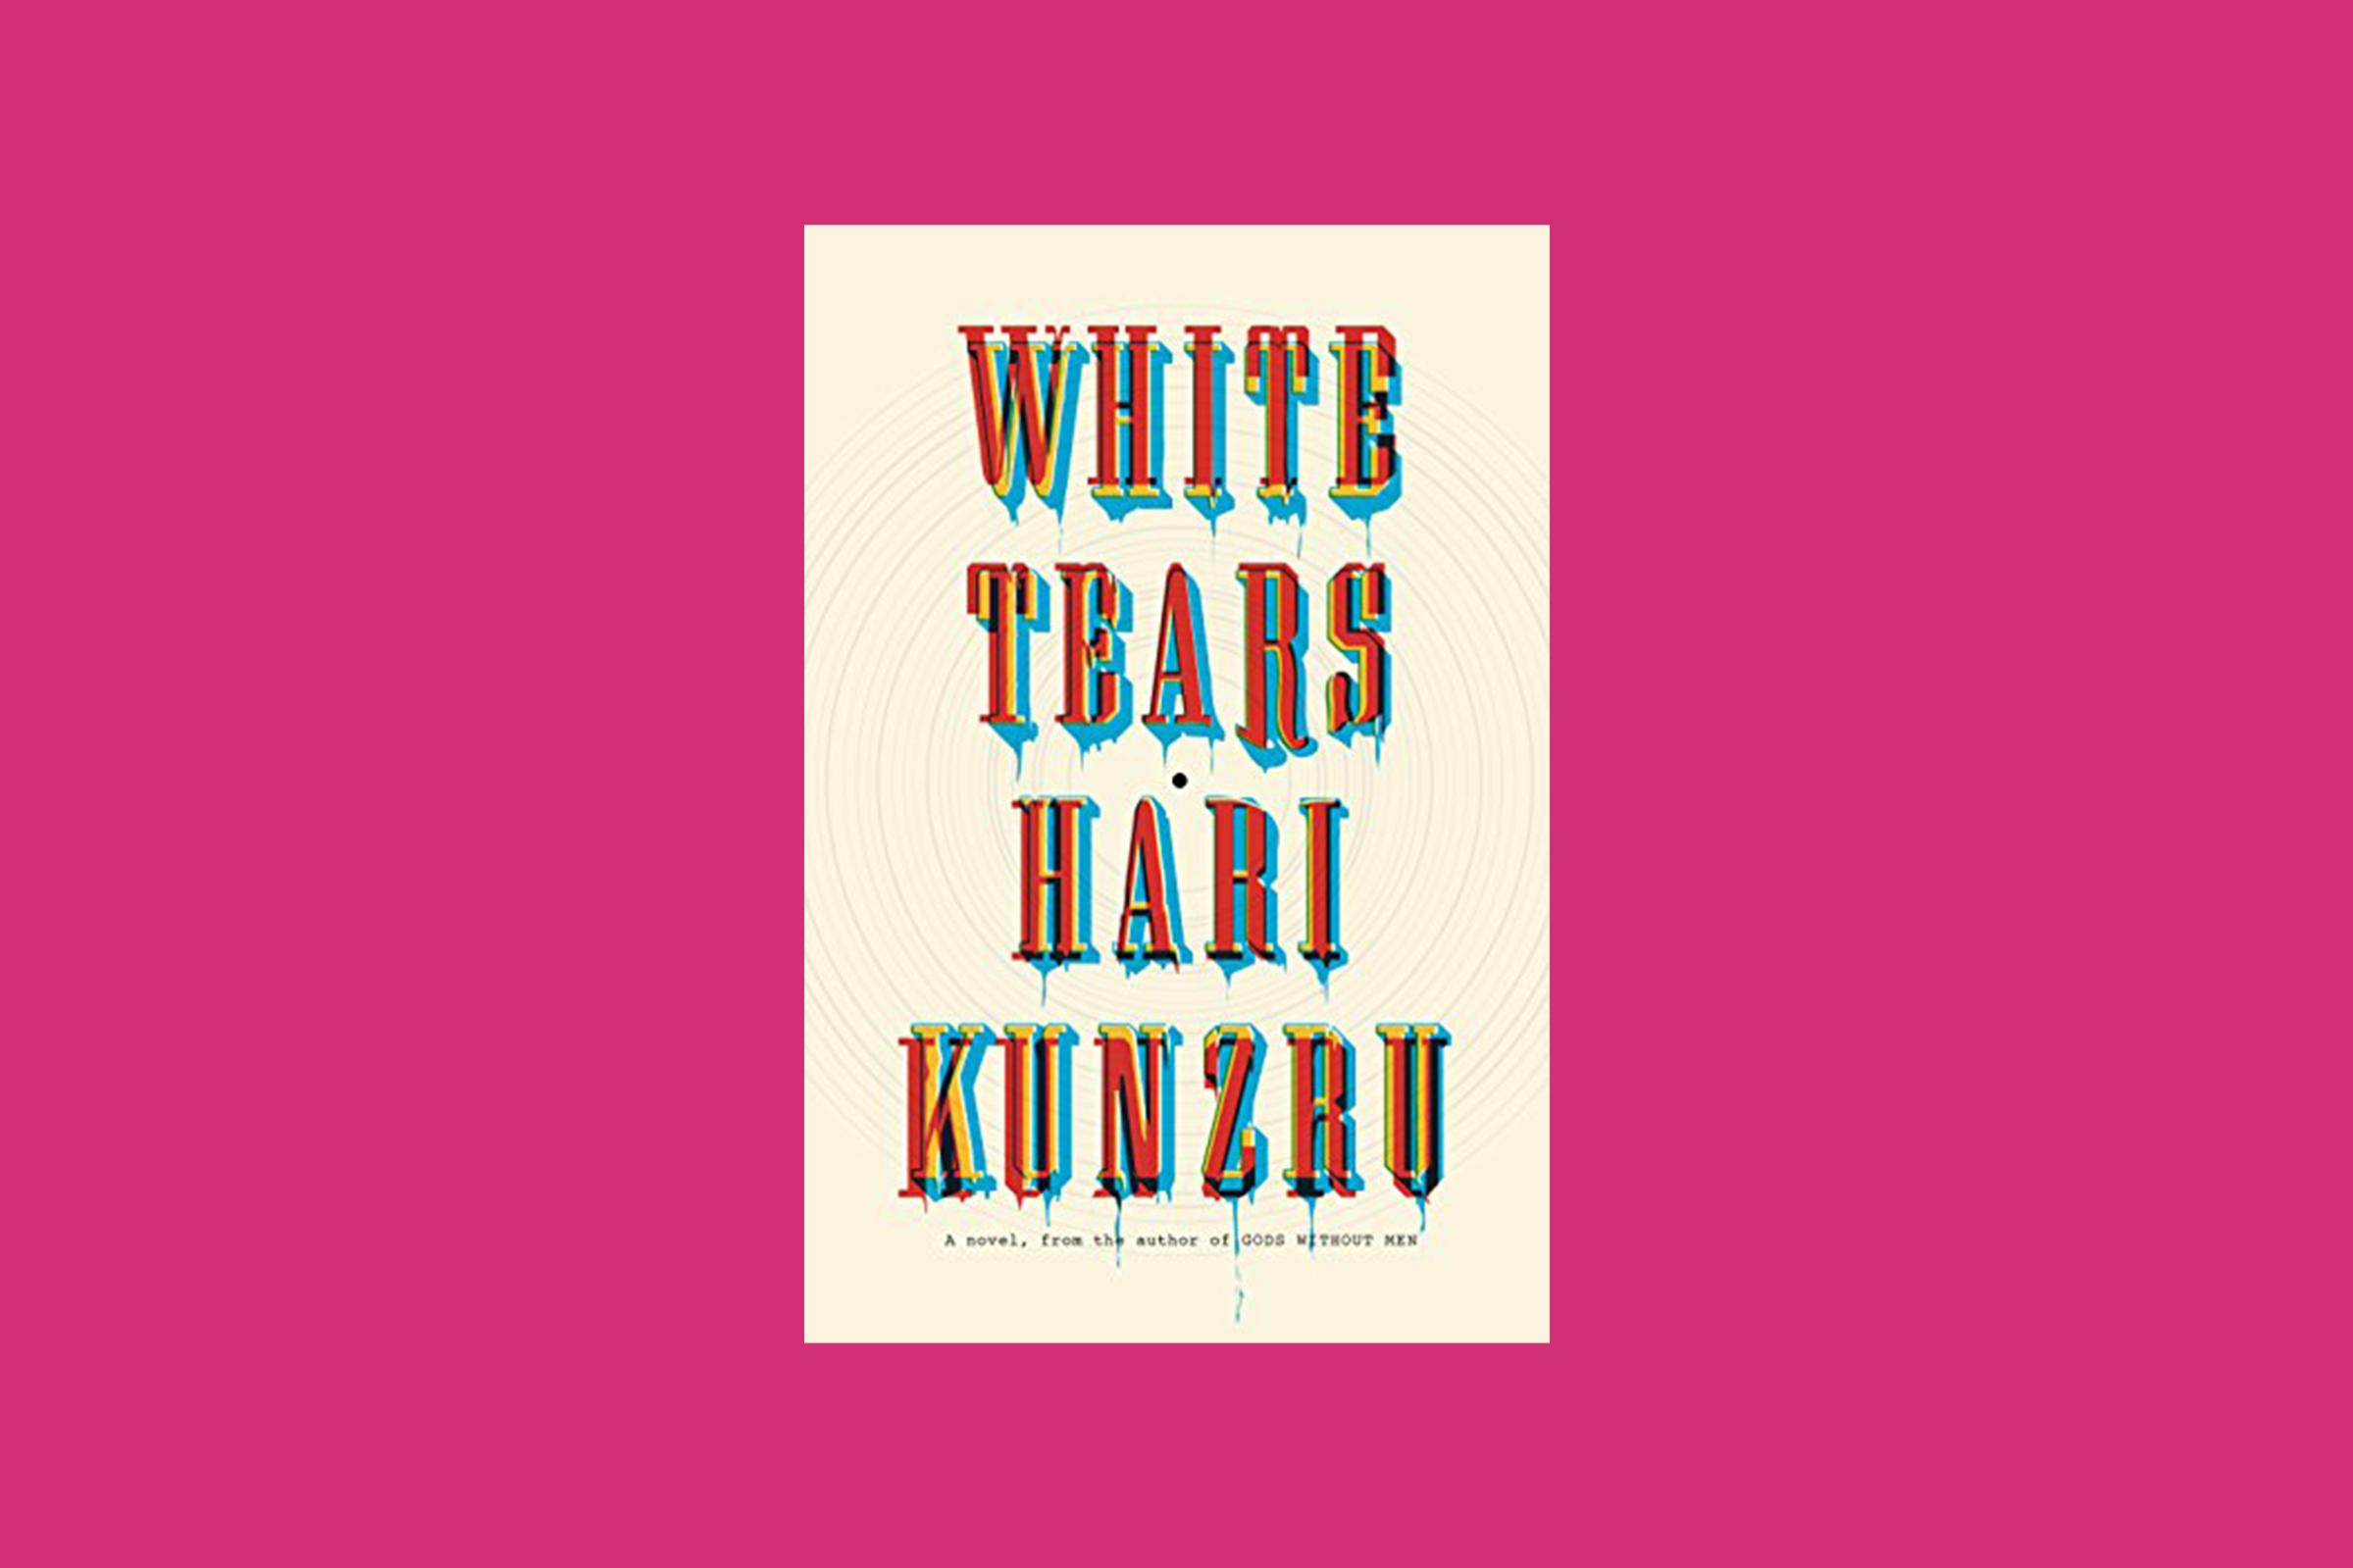 White Tears is one of the top 10 novels of 2017